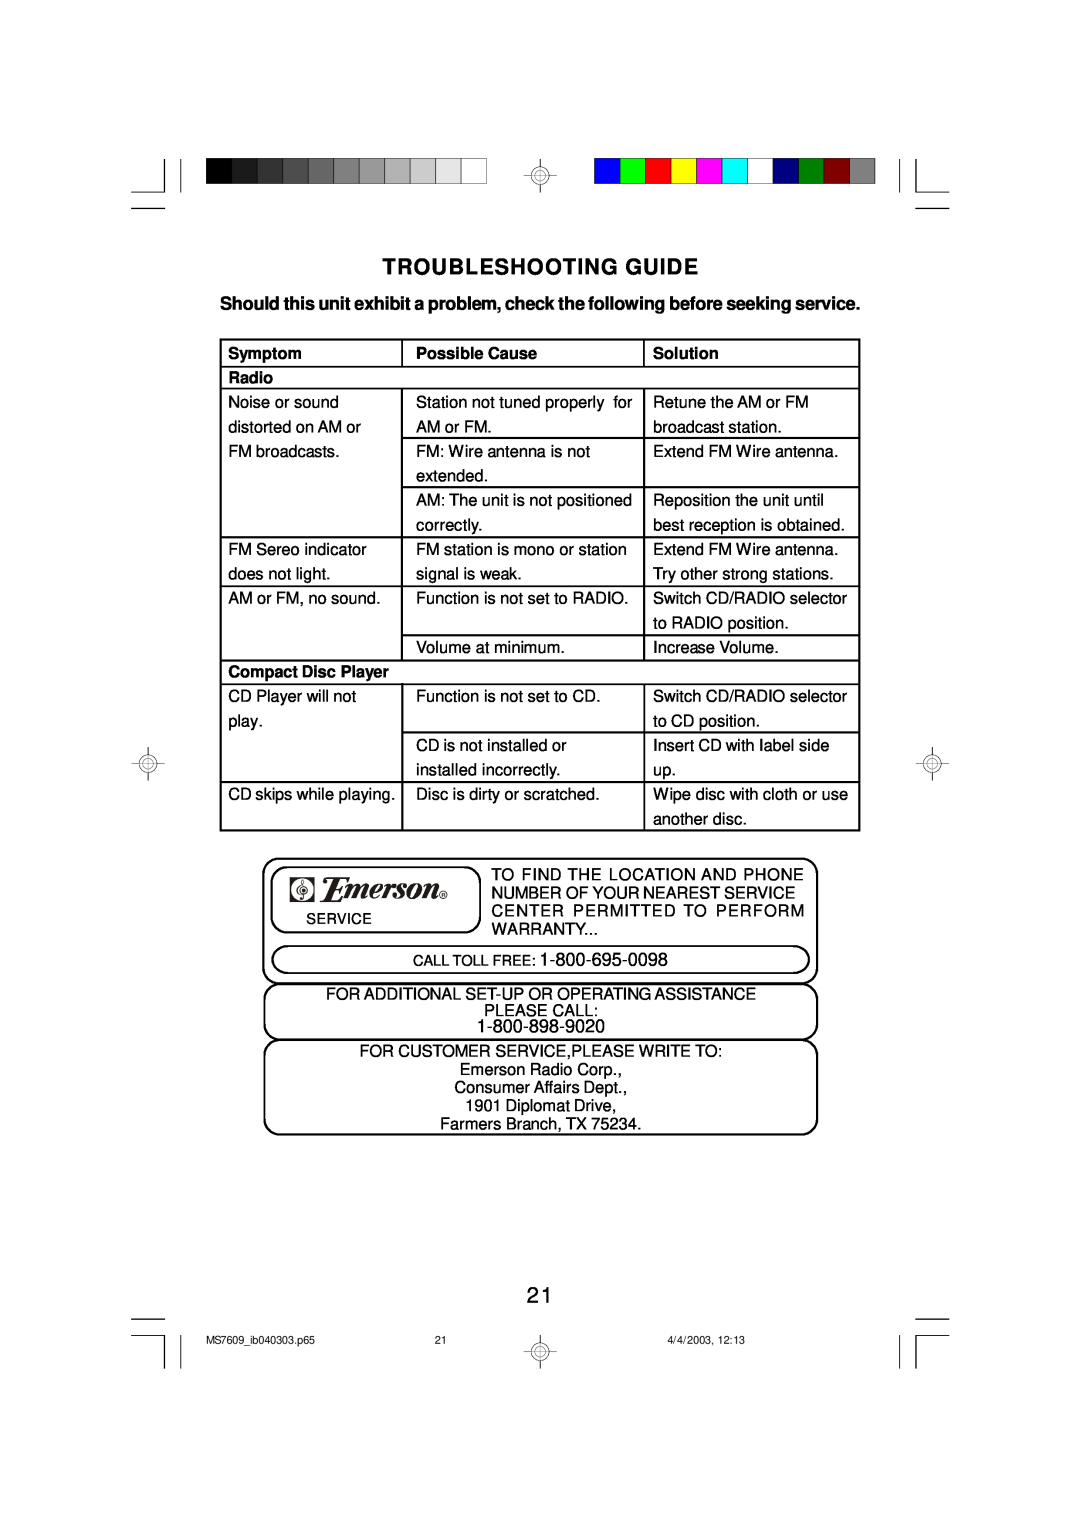 Emerson MS7609 owner manual Troubleshooting Guide, Symptom, Possible Cause, Radio, Compact Disc Player, Solution 